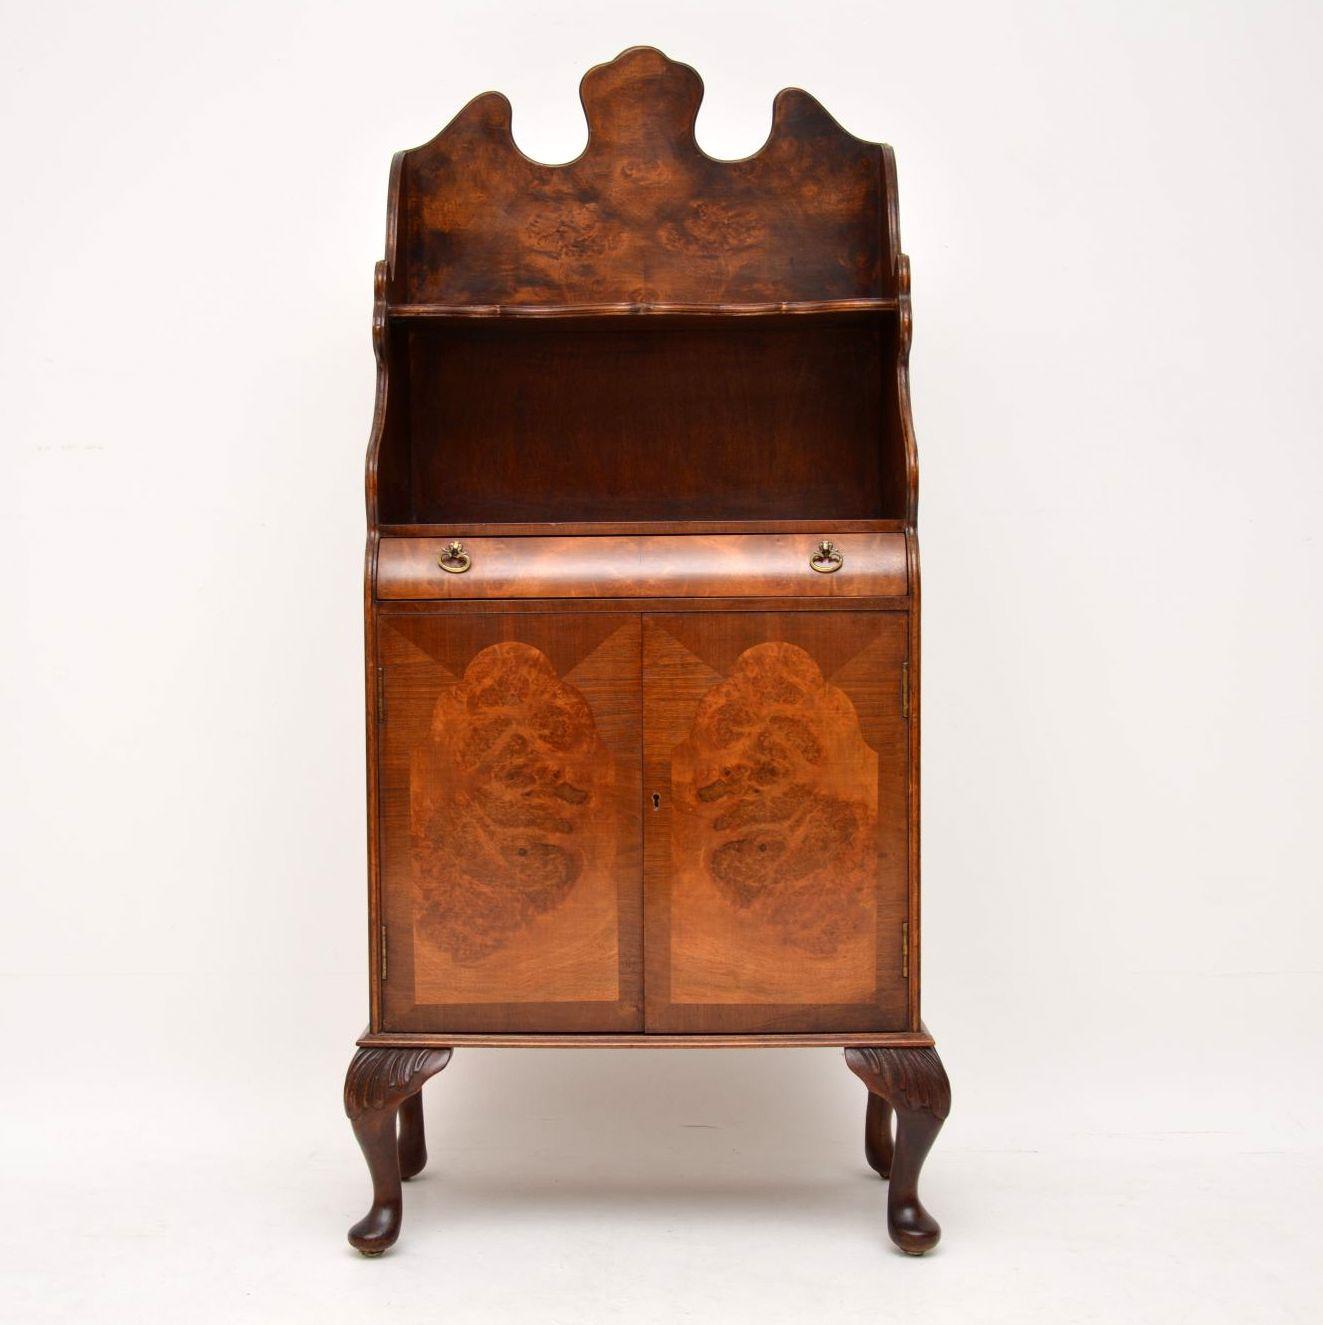 Antique burr walnut cabinet with bookshelves above the cupboards.

This is a very useful piece of furniture, which could fit in many locations in the home.

The top and the sides are beautifully shaped out and it sits on carved feet. It has a